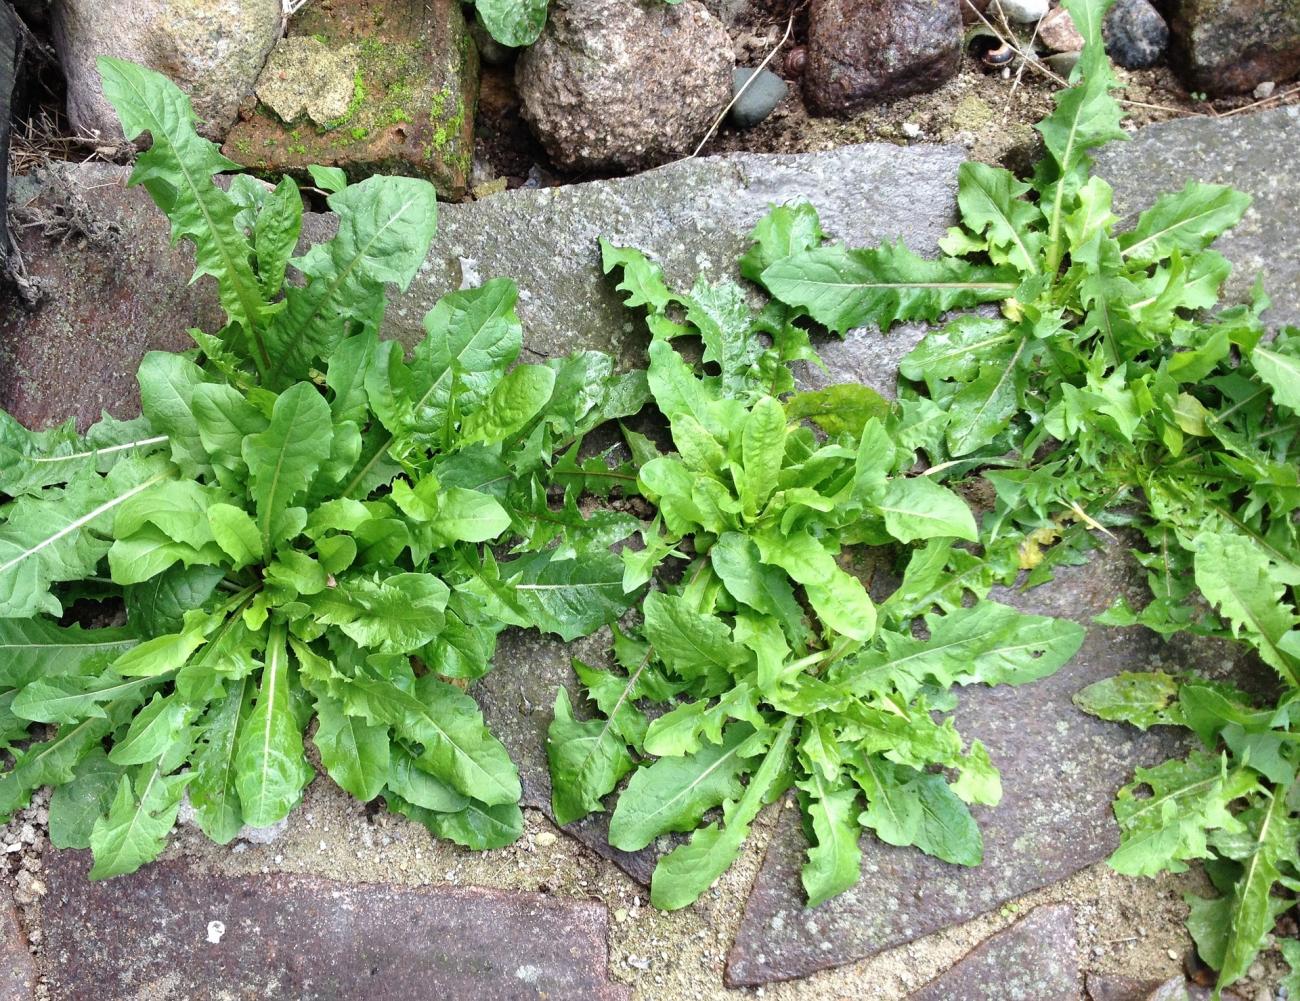 Common Garden Weed Identification: Pictures and Descriptions ...